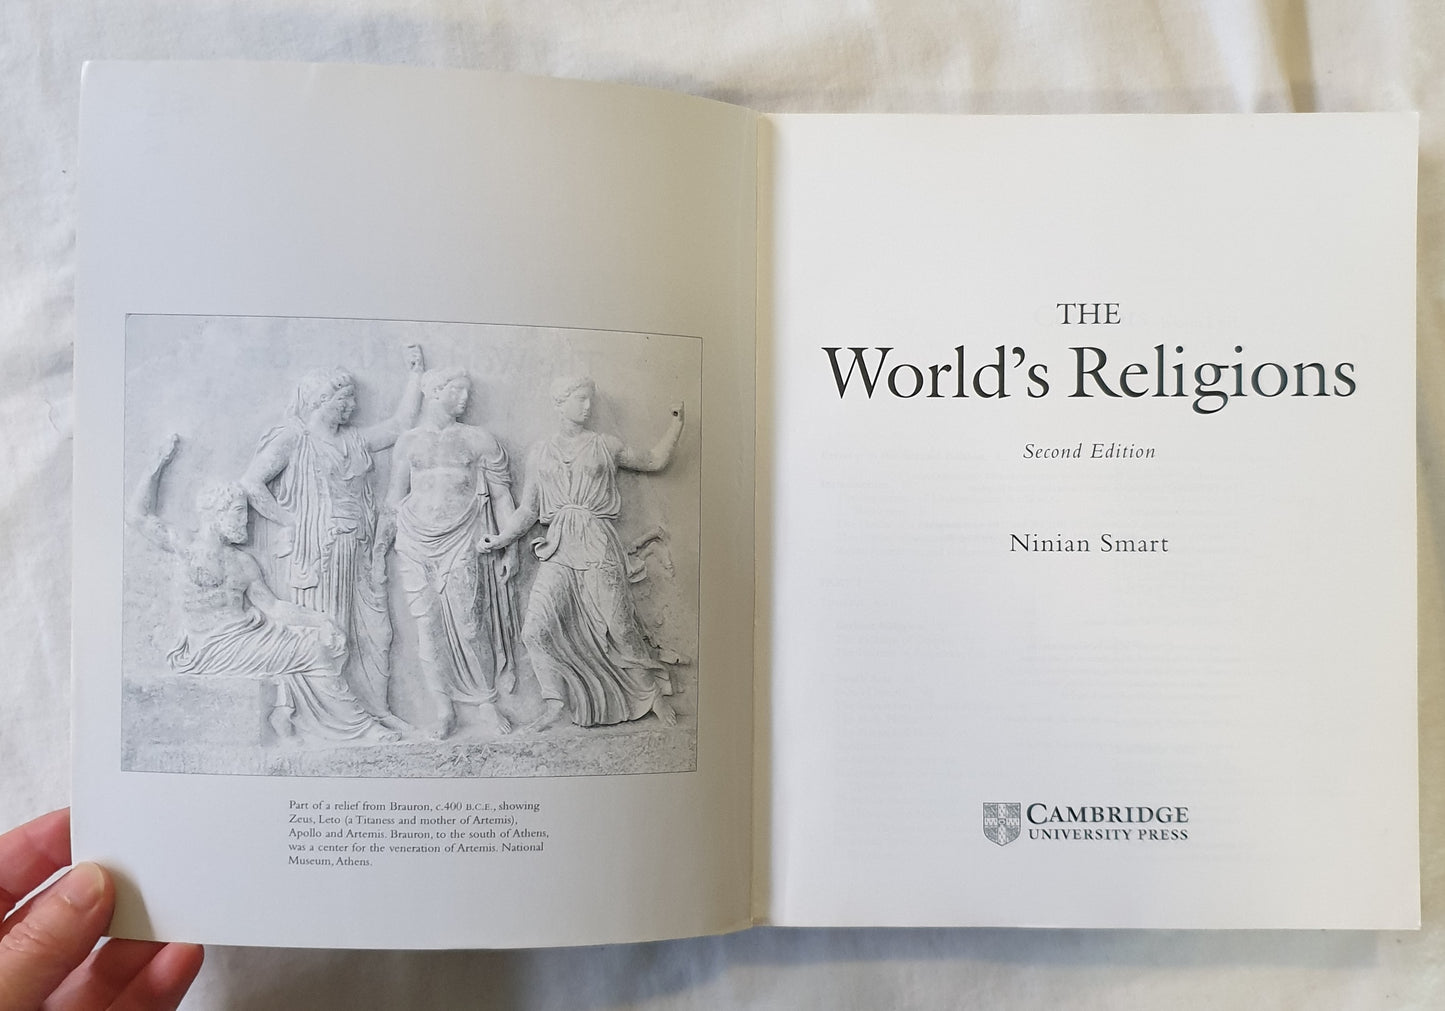 The World's Religions by Ninian Smart